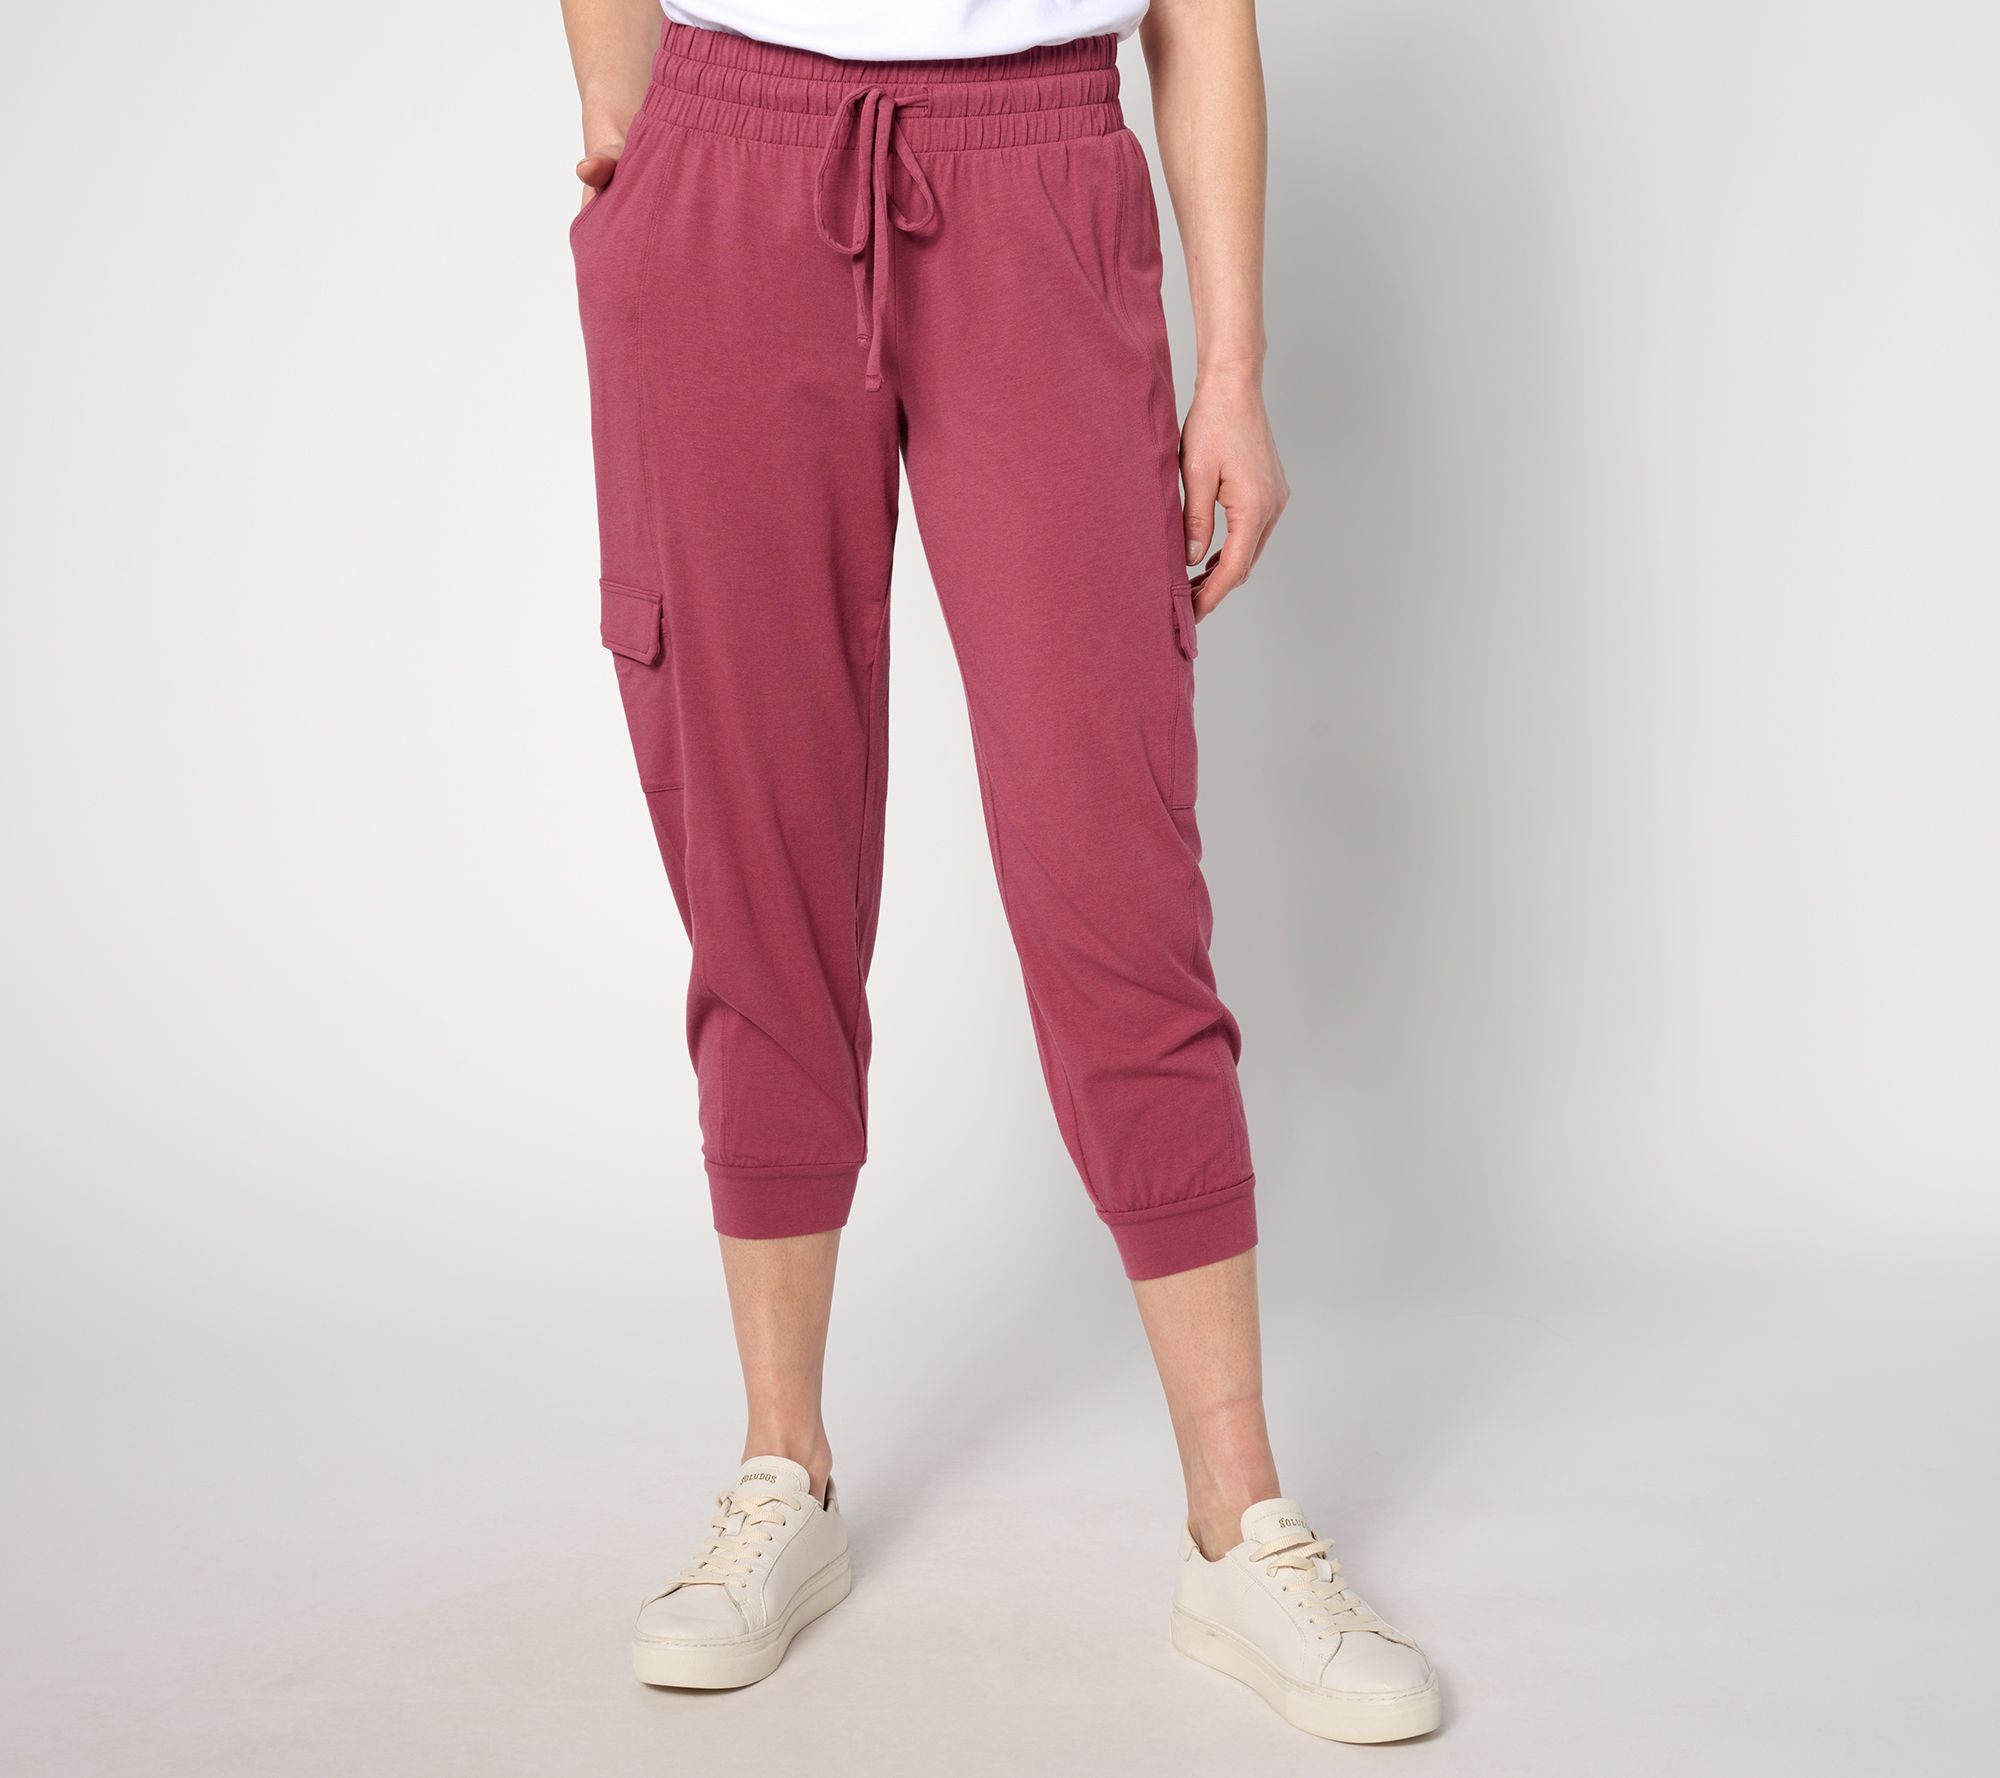 Soft Cozy Joggers, Soft Stretch Sweatpants With Pockets, Lounge